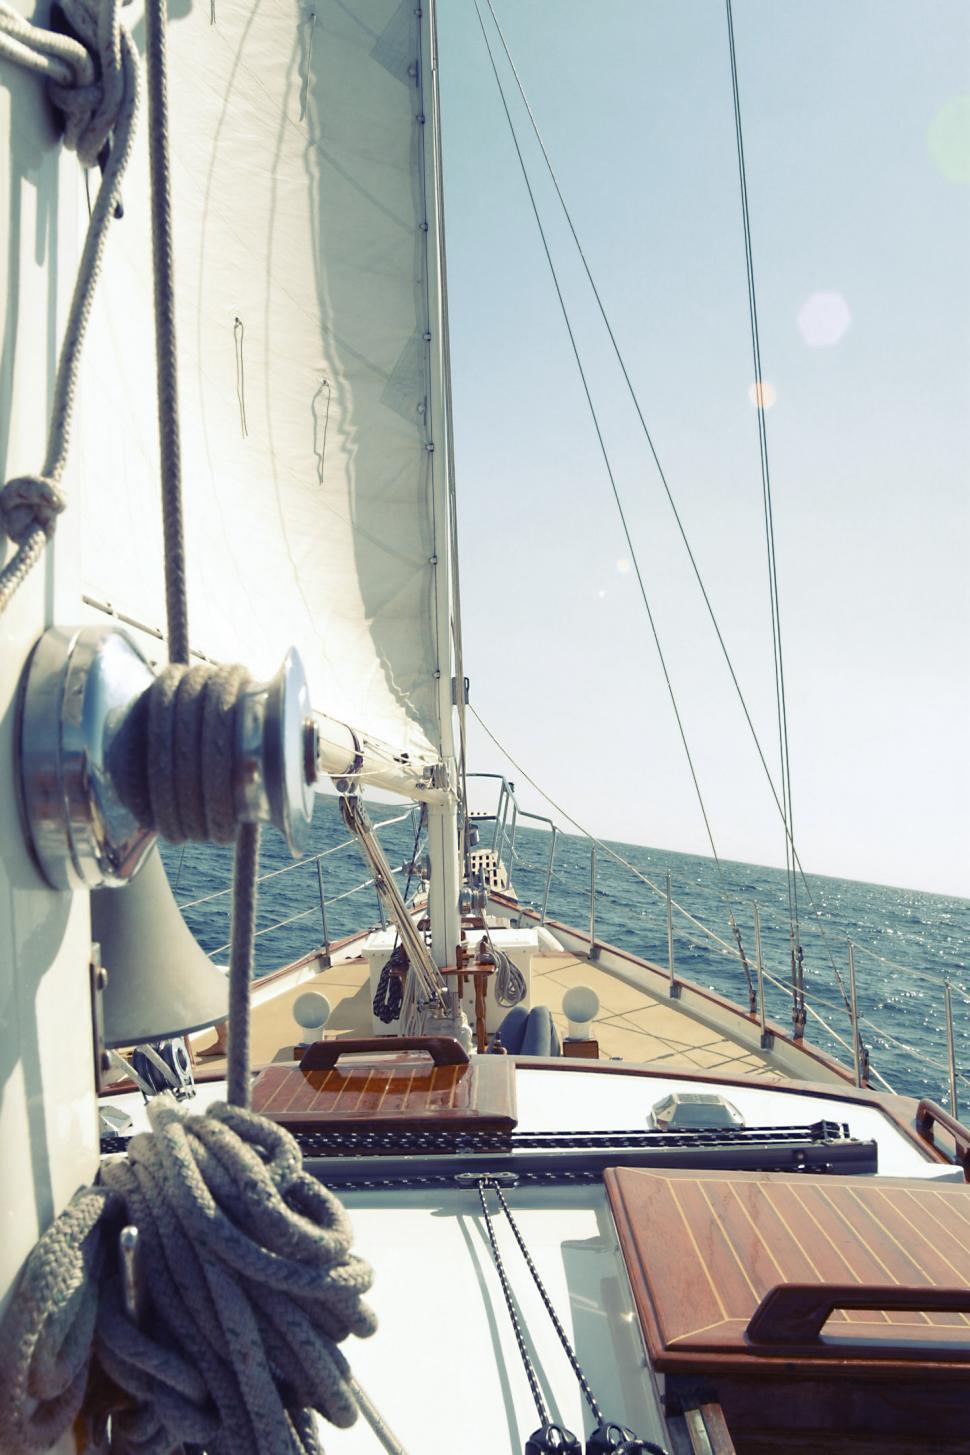 Free Image of Sailboat Sailing in the Open Ocean 